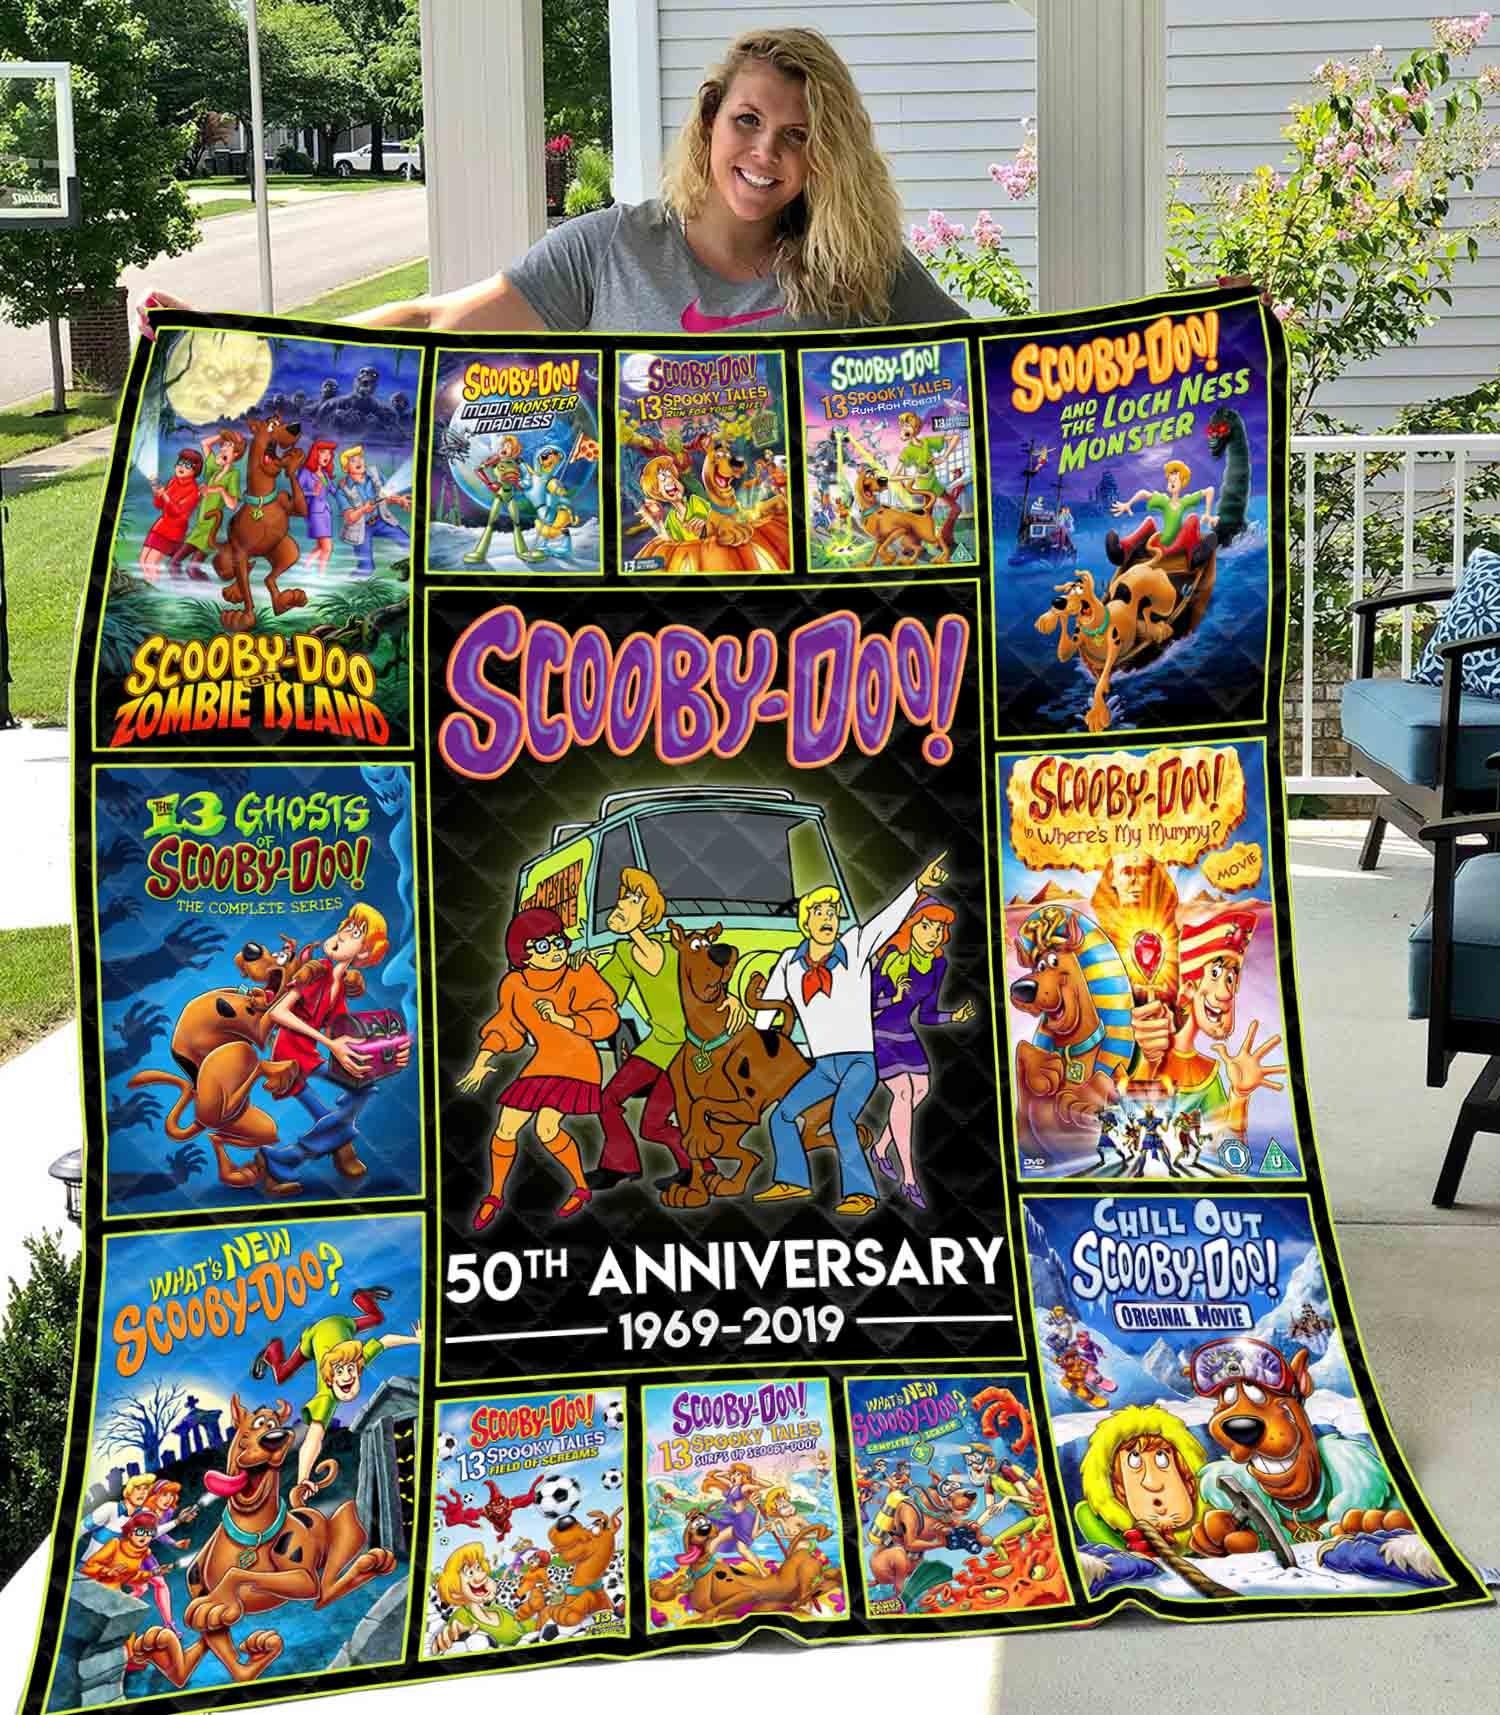 Scooby doo 50th anniversary quilt